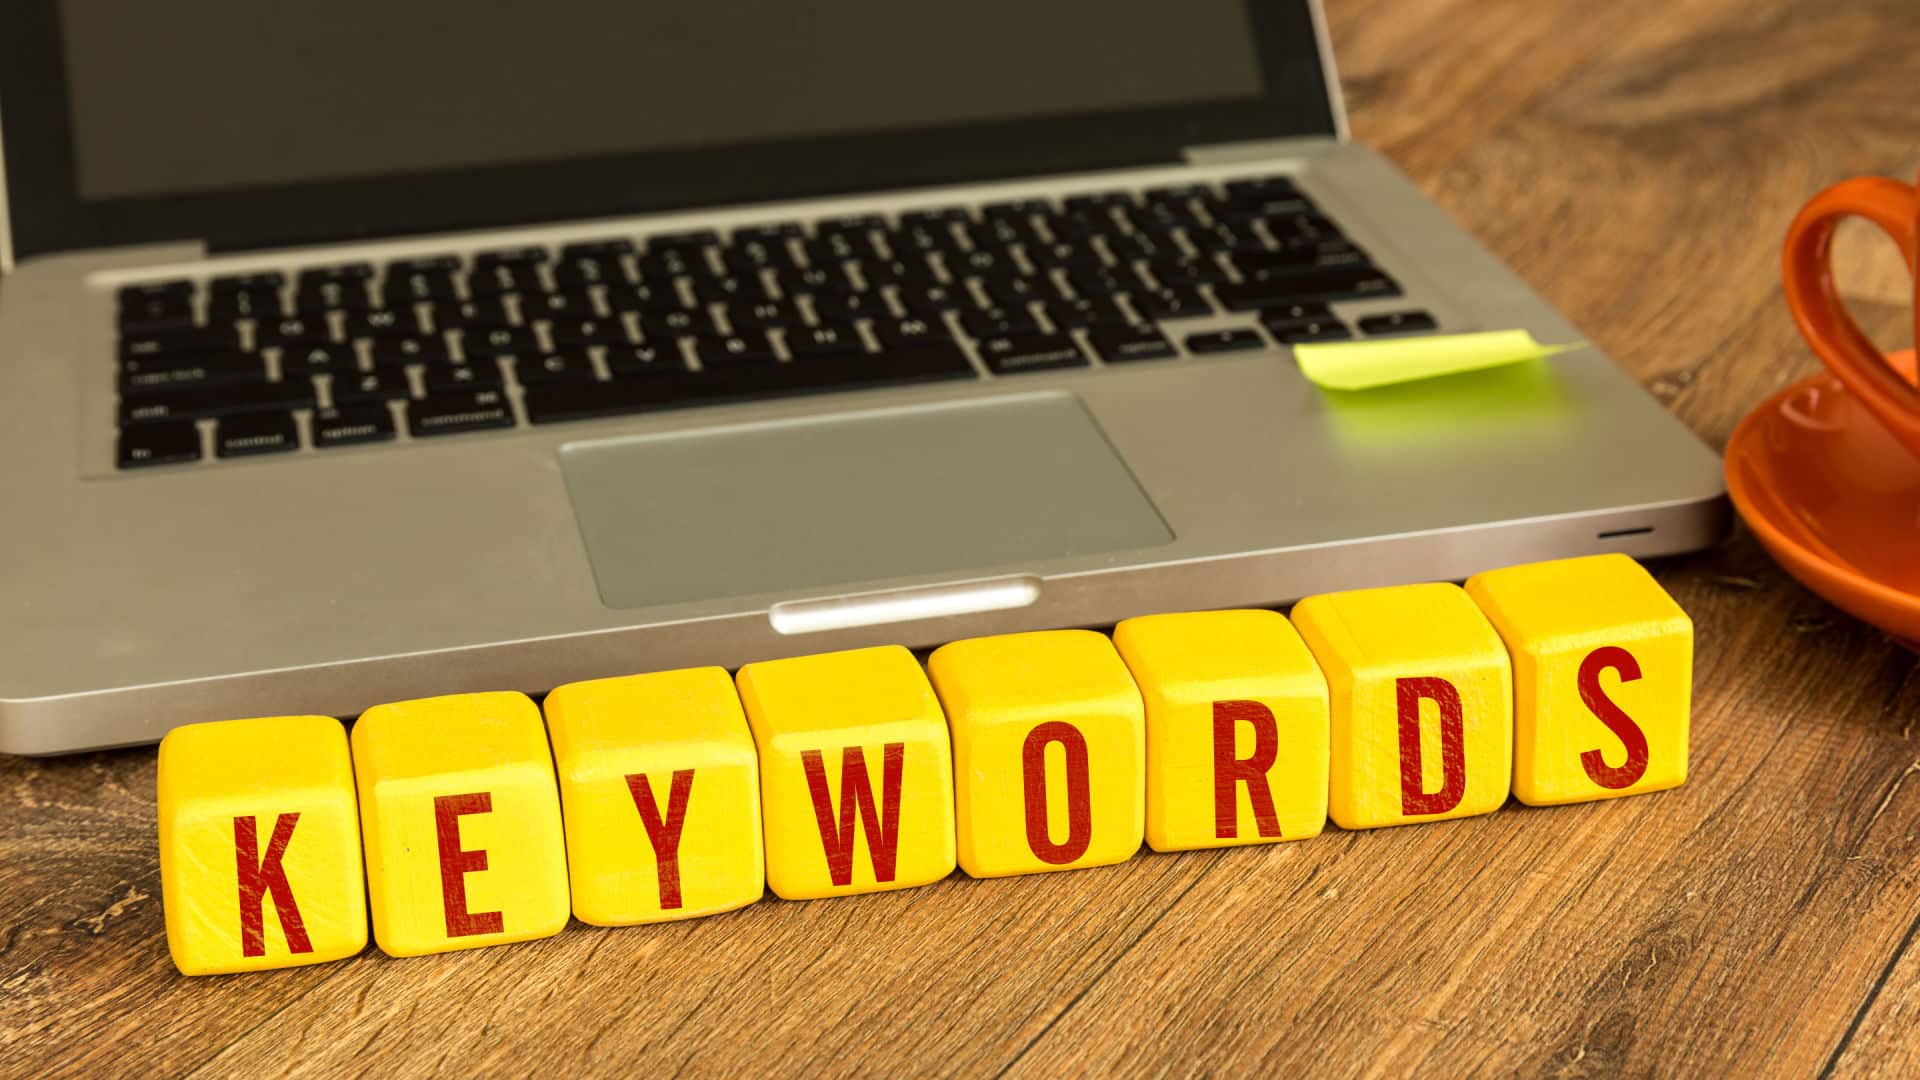 Google’s “Remove redundant keywords” recommendations have changed